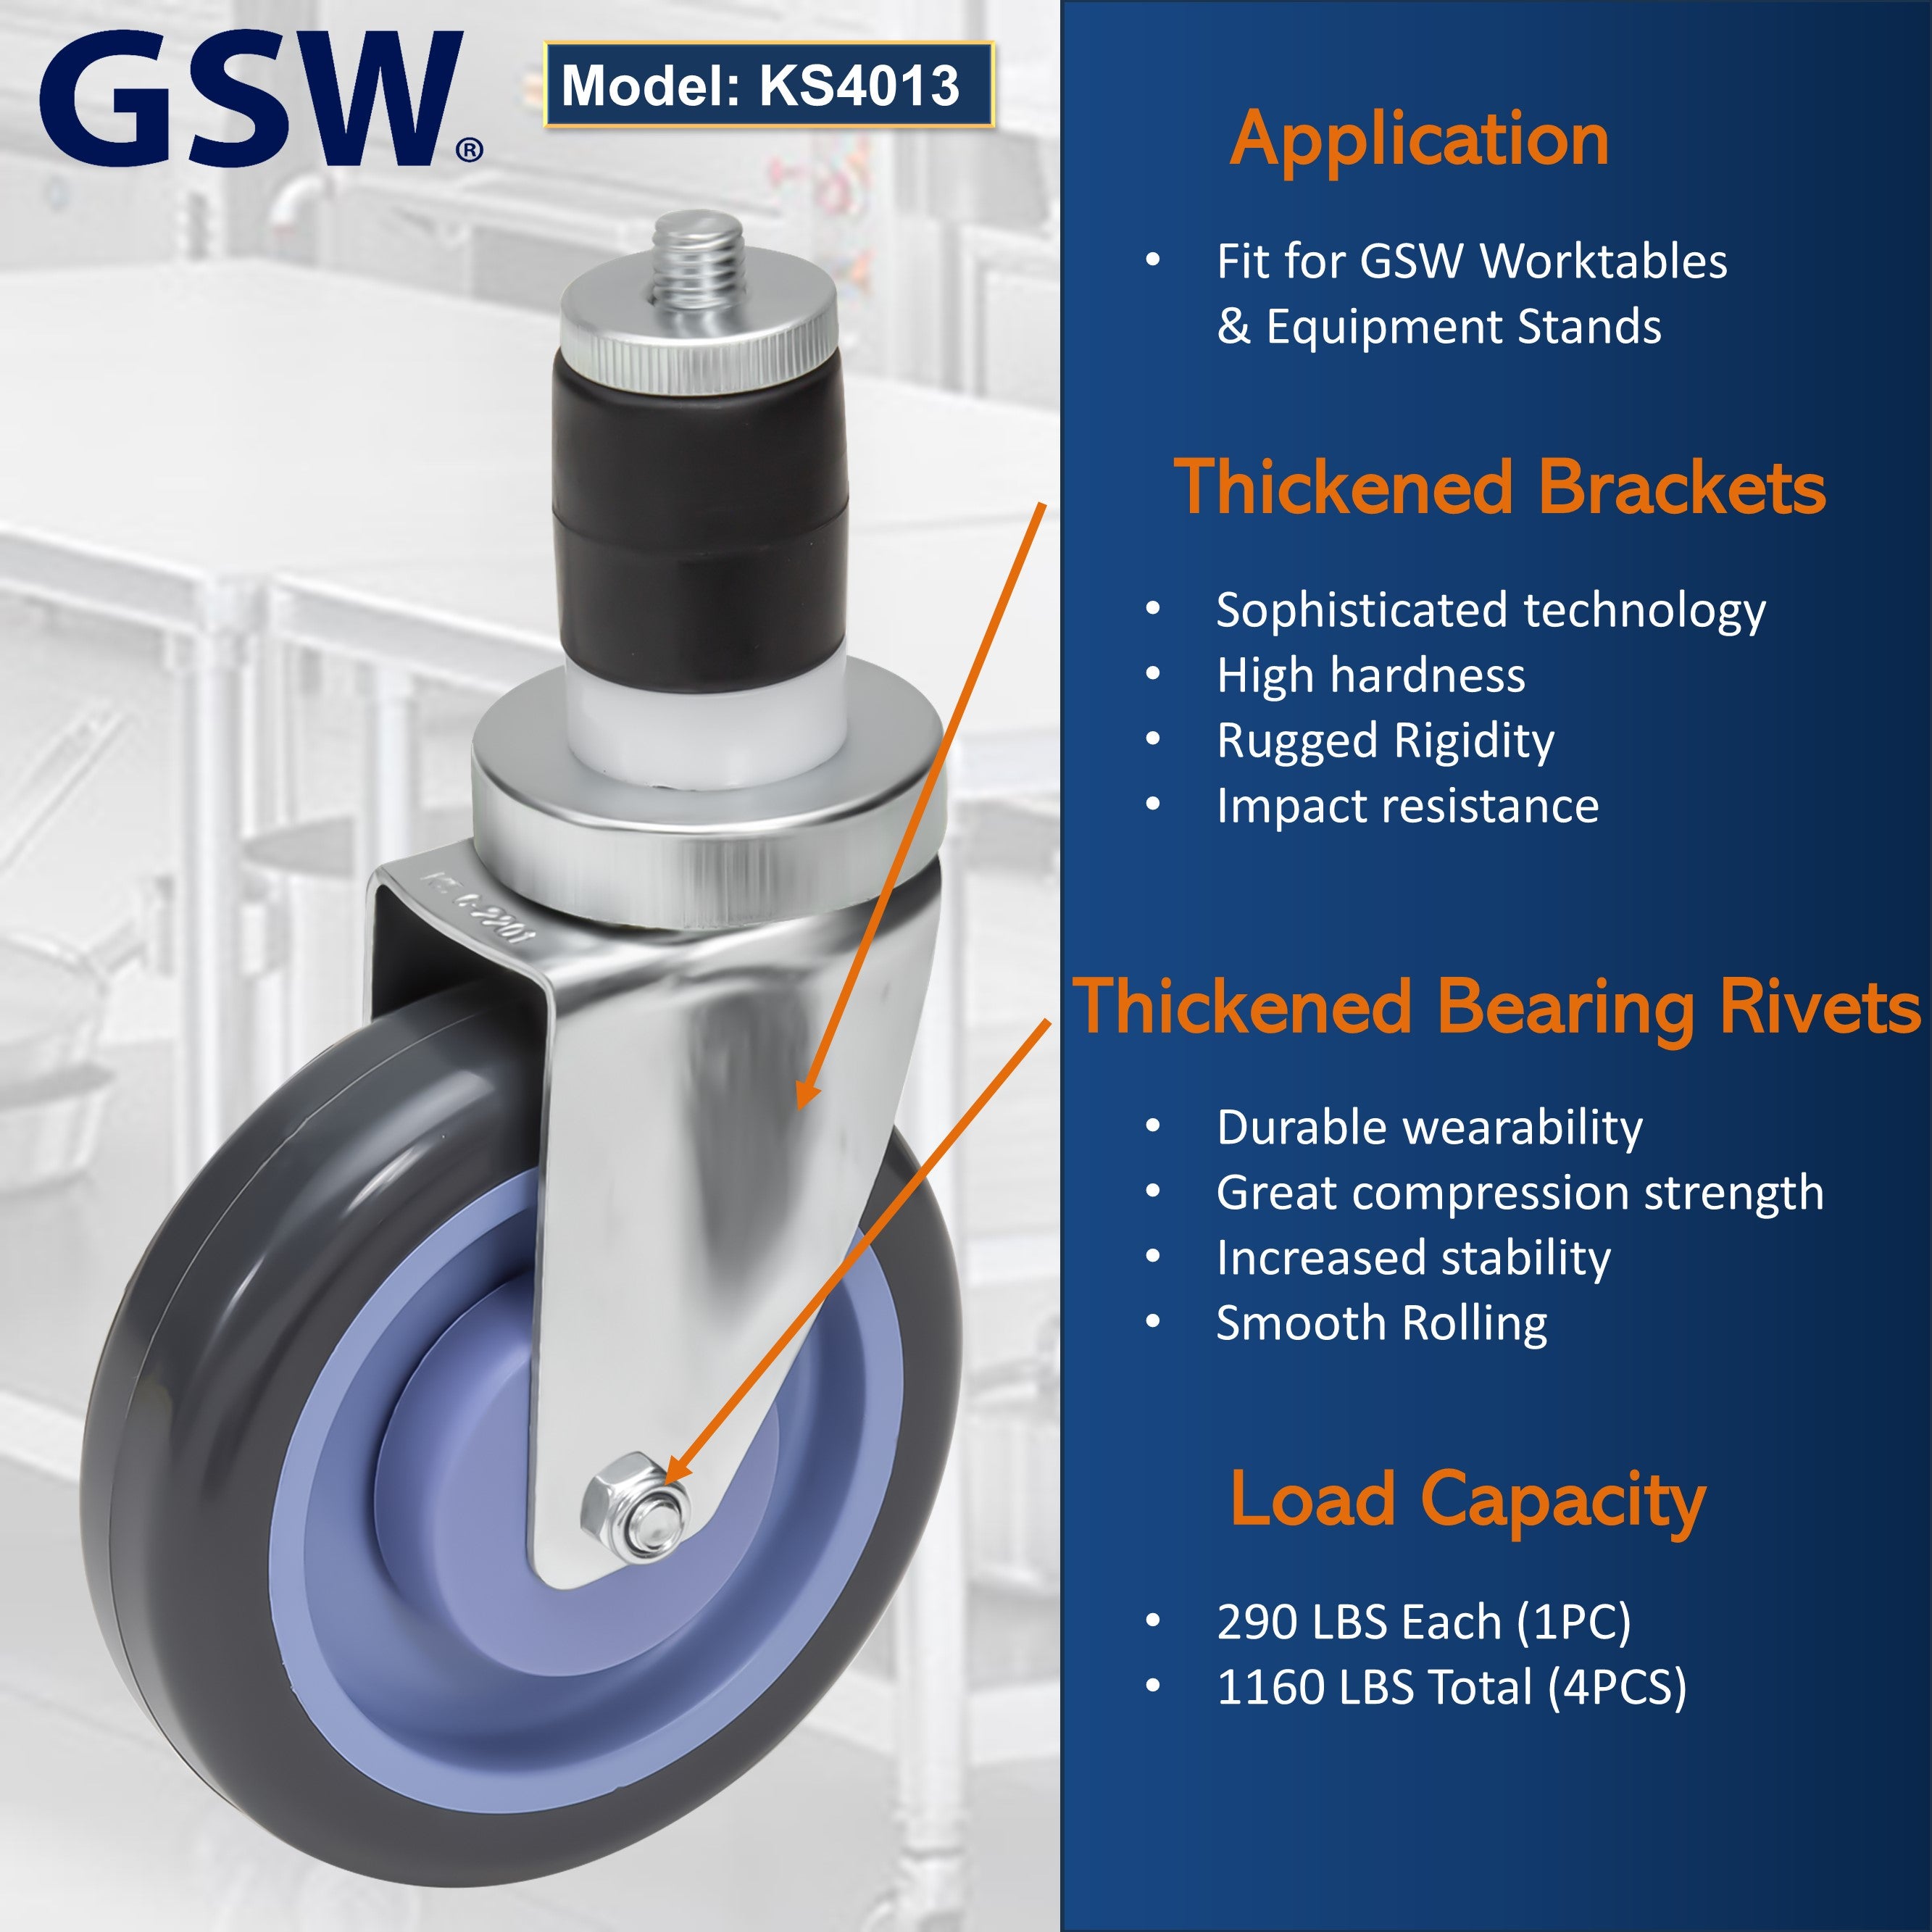 GSW 3" Heavy Duty Casters Wheels with Expanding Stem - Loading Capacity: 1160 lbs. Use for Worktables and Equipment Stands (Swivel)